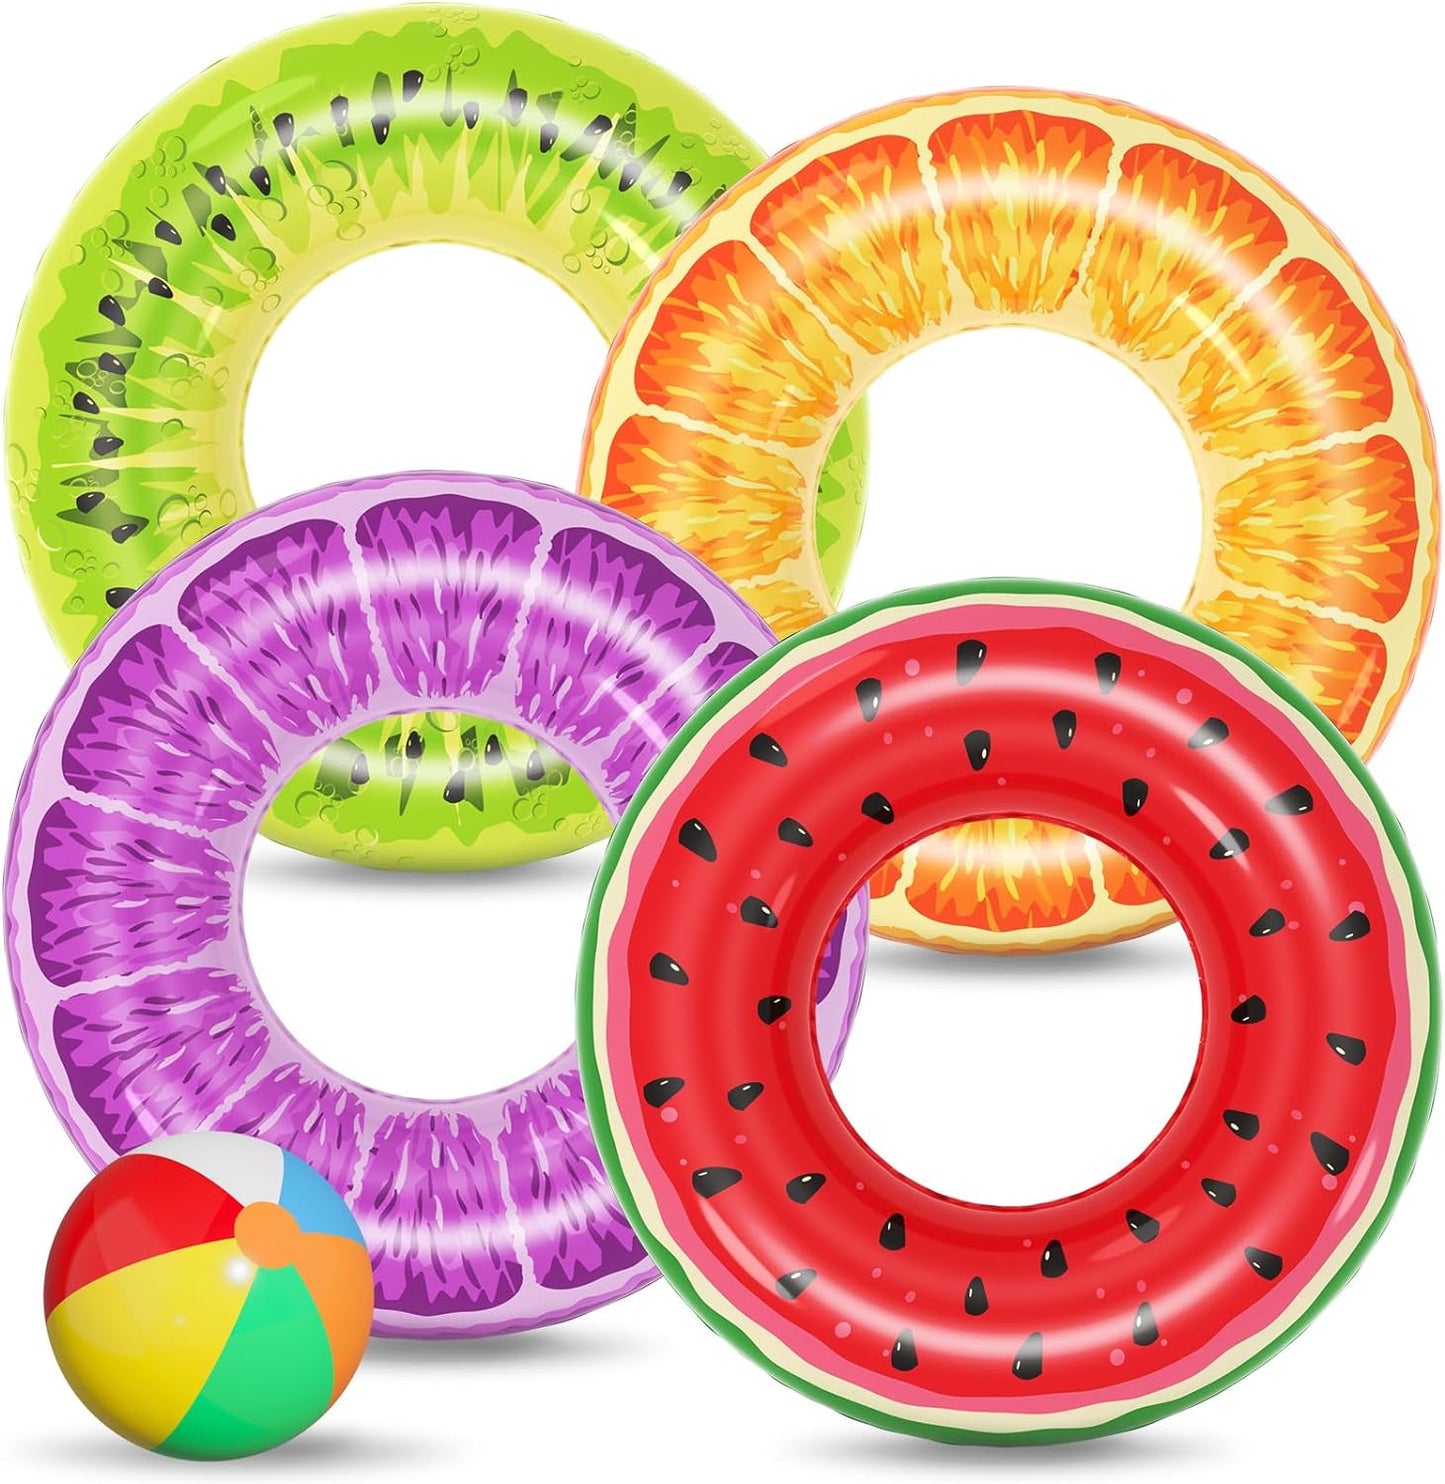 Inflatable Pool Floats Kids - 2 Pack Floaties Pool Tubes Swim Rings Fruit Water Floaty Watermelon Kiwi Inflatable Pool Toys Float for Swimming Pool Party Lake Beach Adults